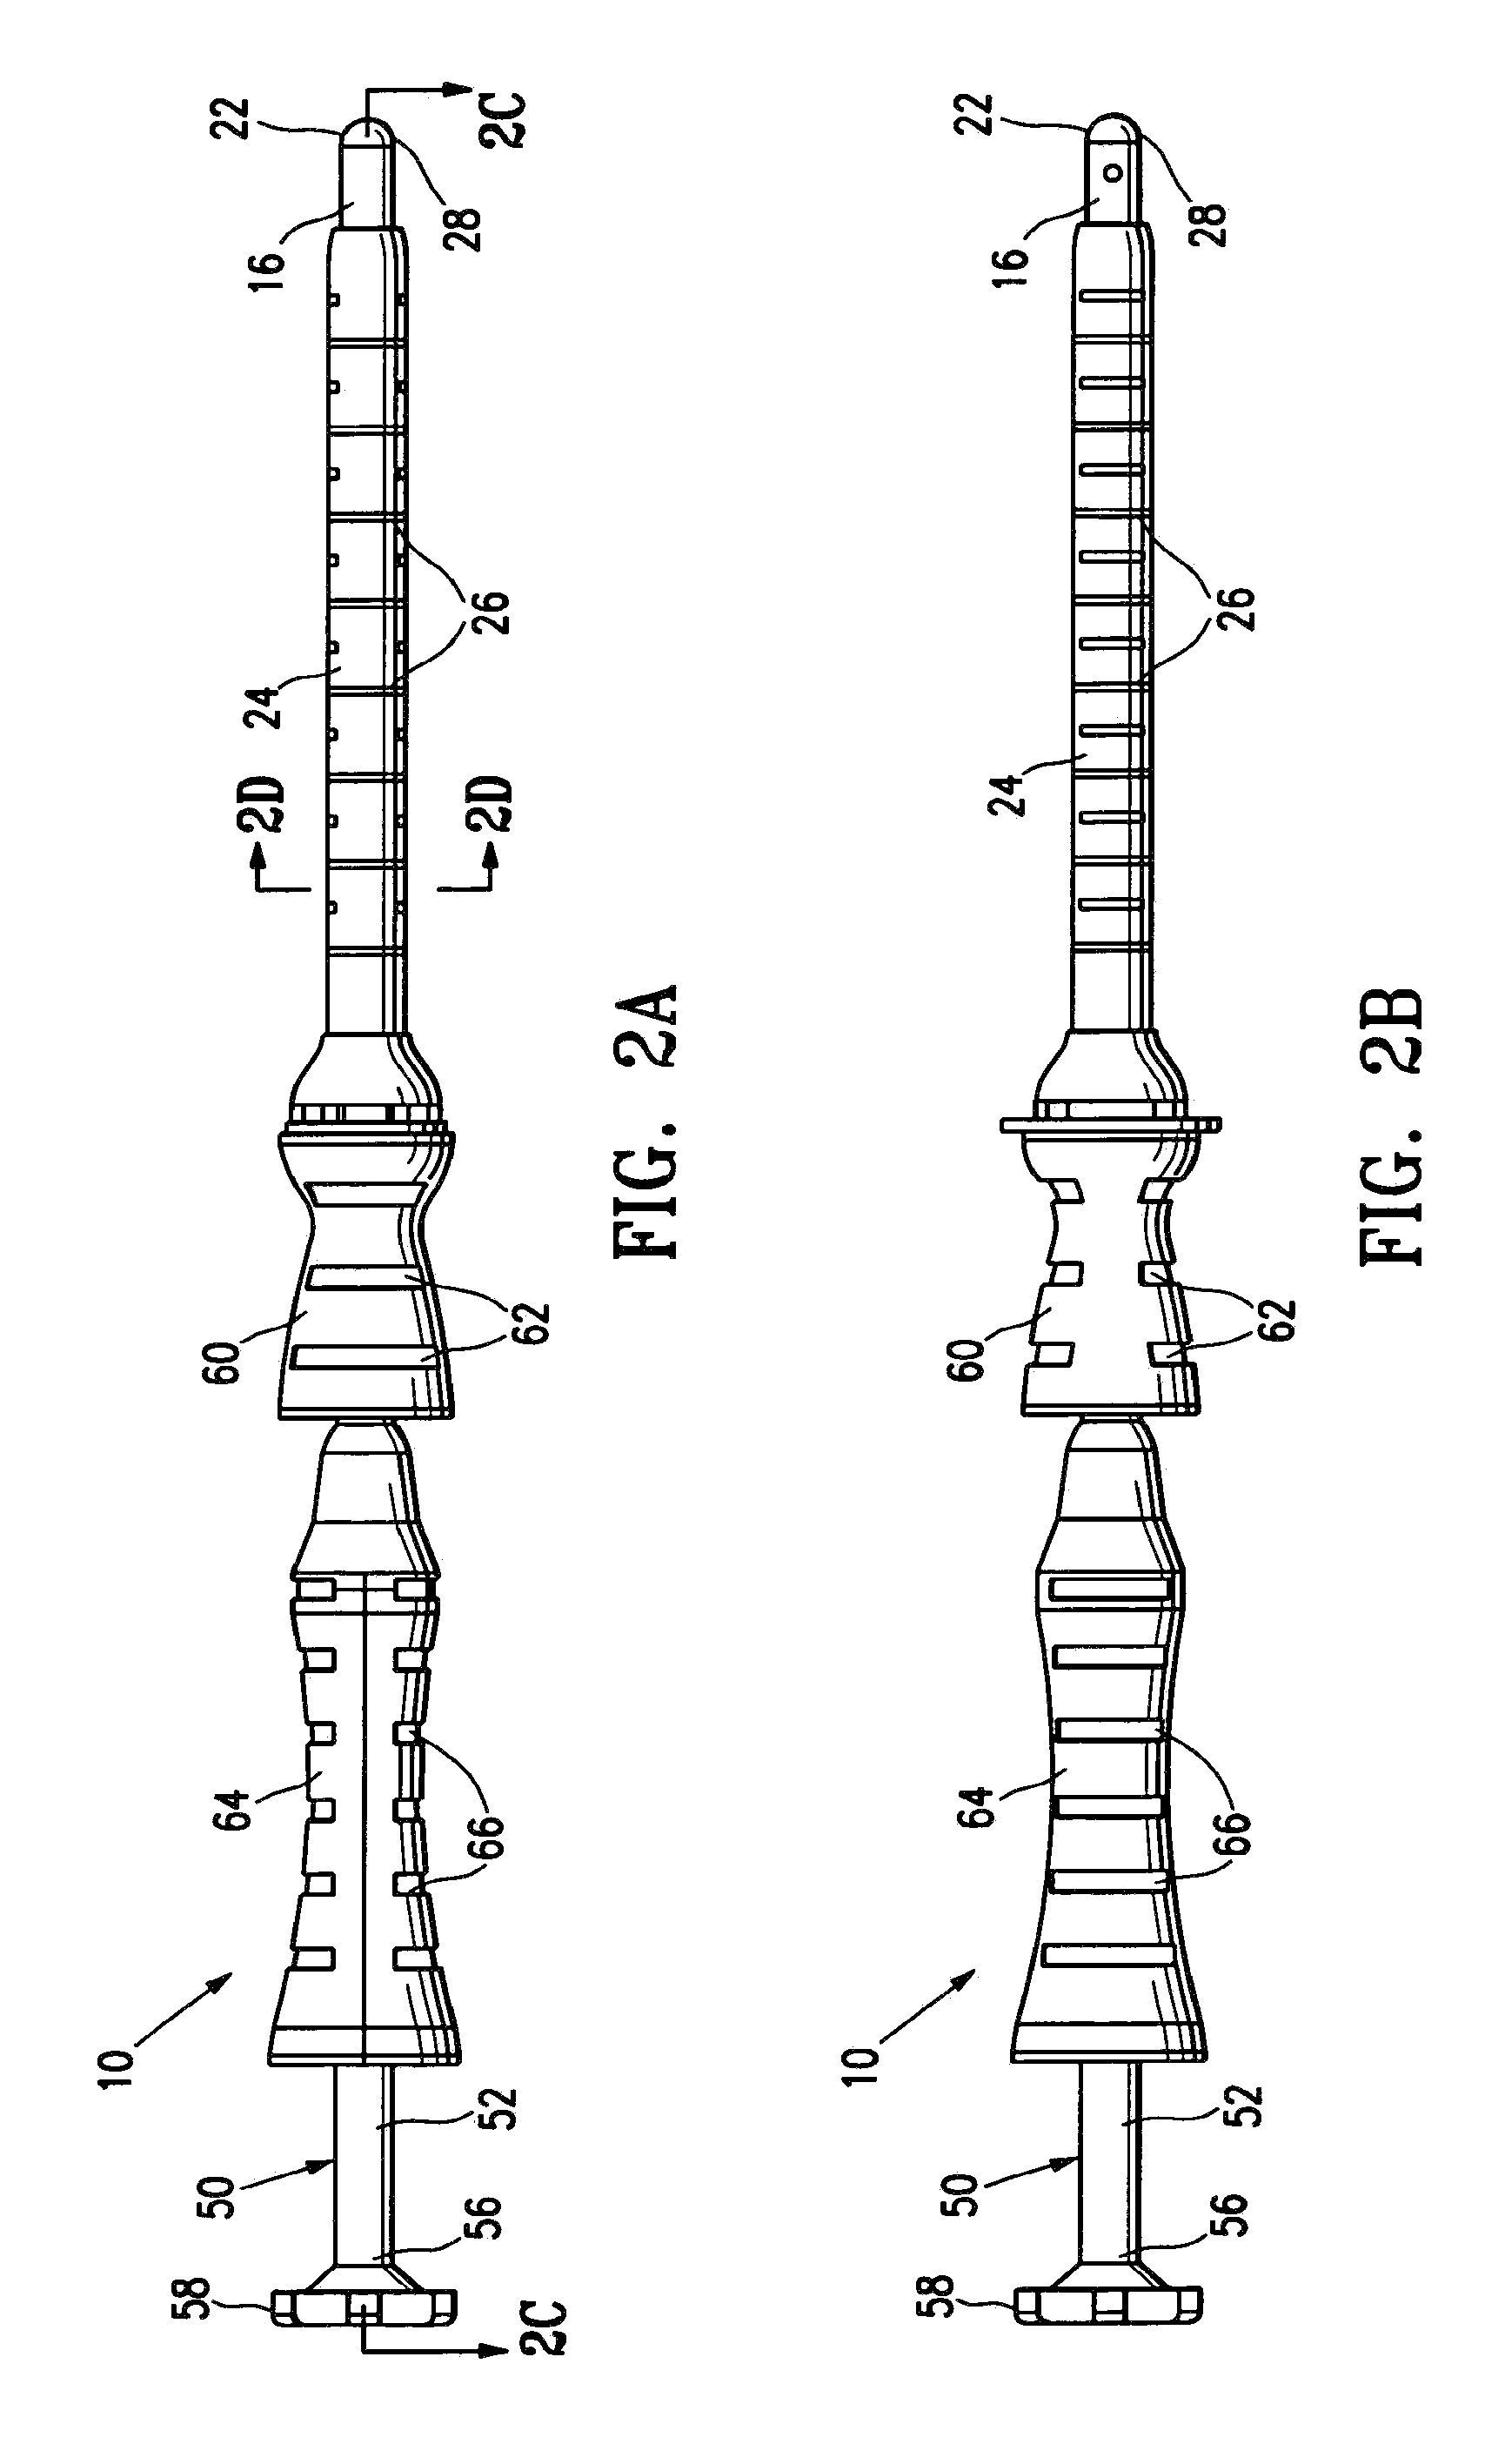 Marker delivery device with obturator